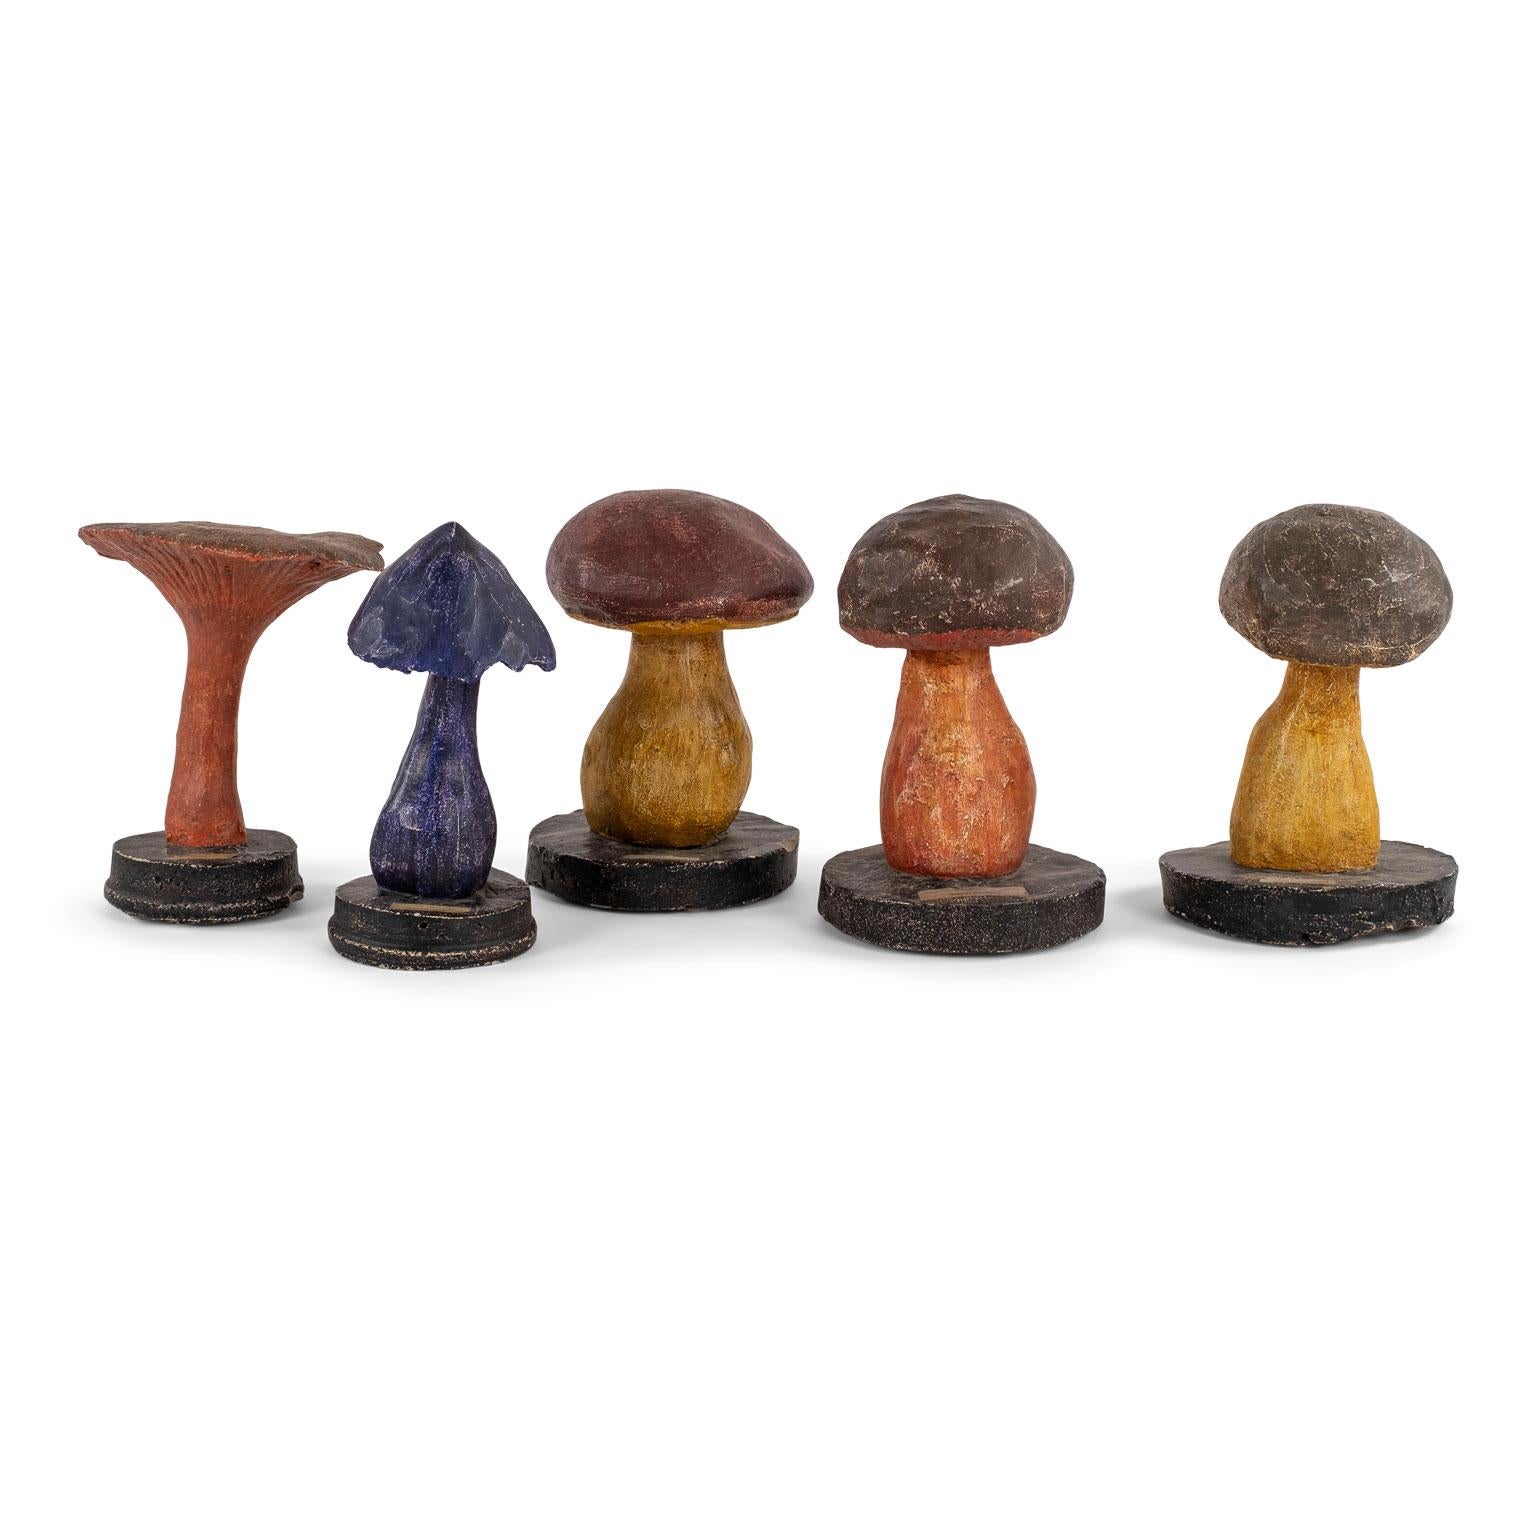 Vintage Instructional Mushroom Model In Fair Condition For Sale In Houston, TX